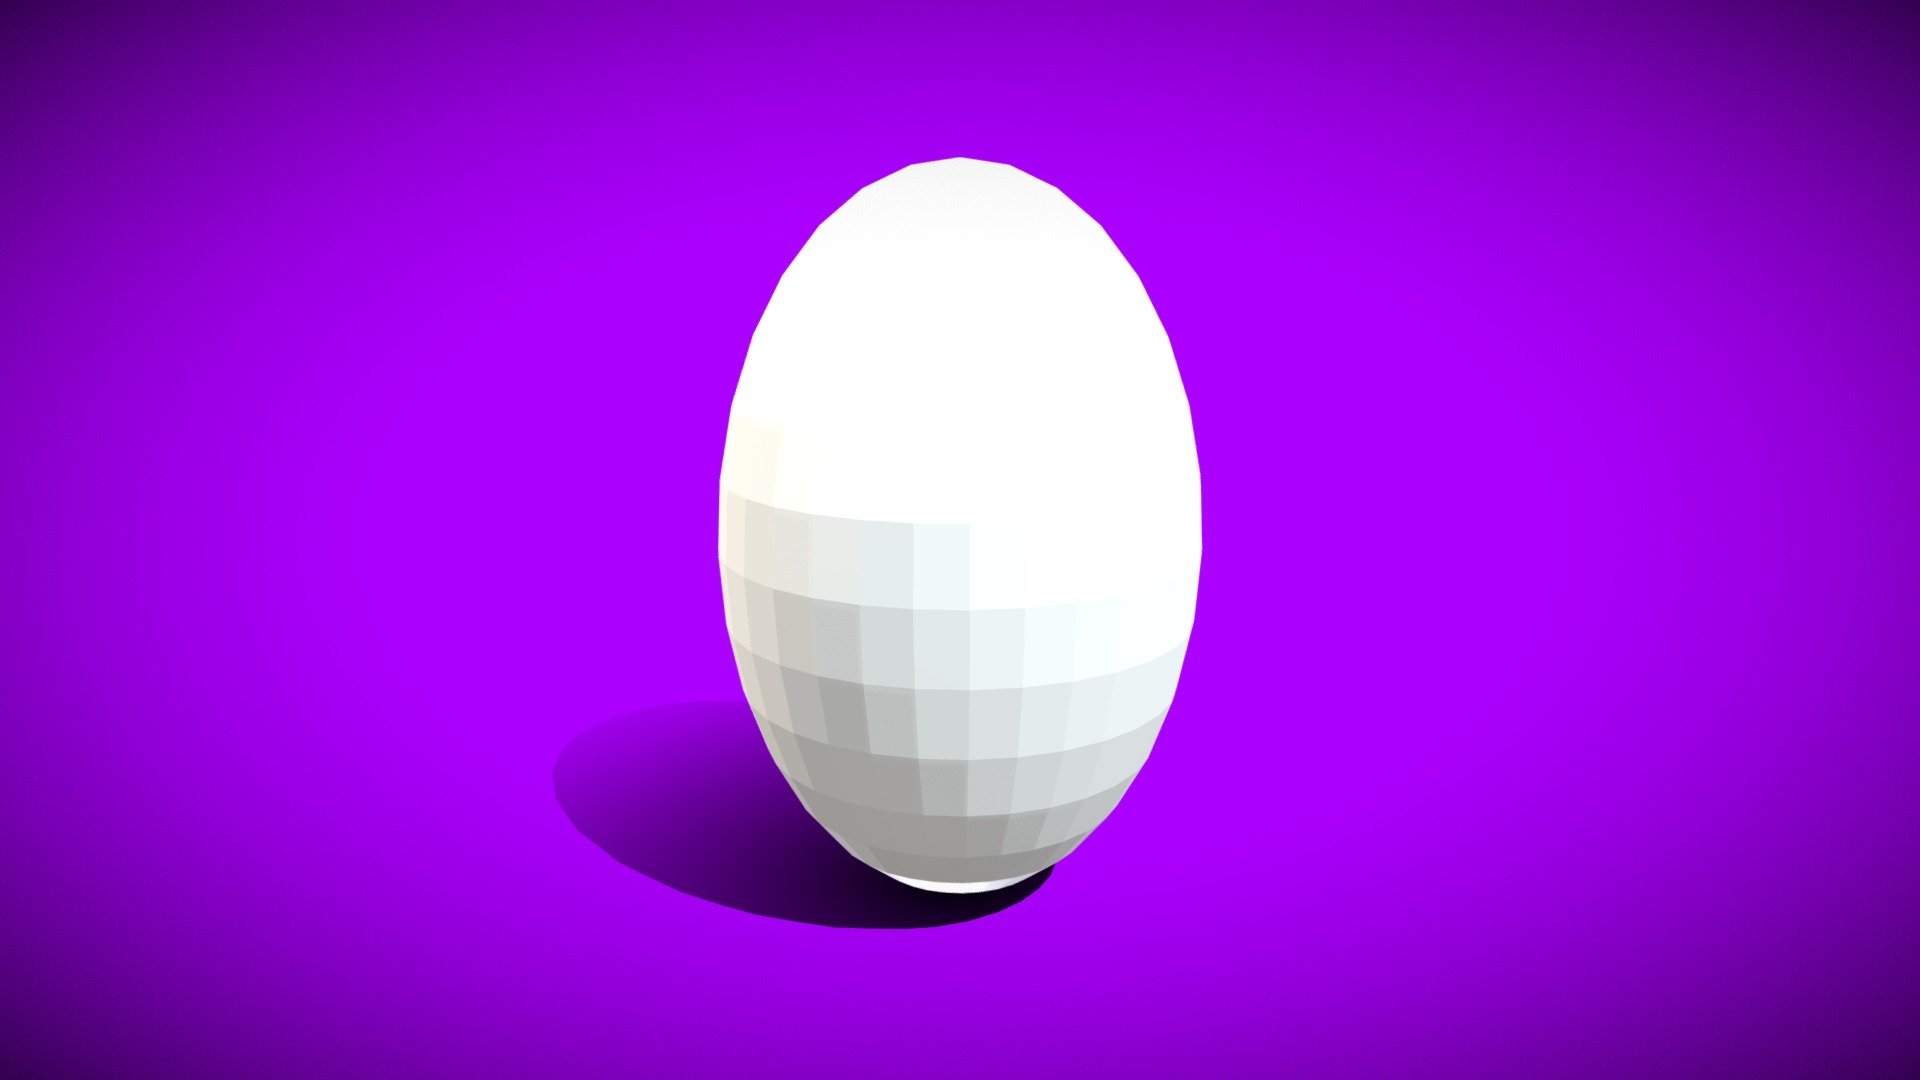 NEW* CHOOSE THE PET YOU HATCH FROM EGGS in Adopt Me! Always Hatch  LEGENDARY! (Roblox) 